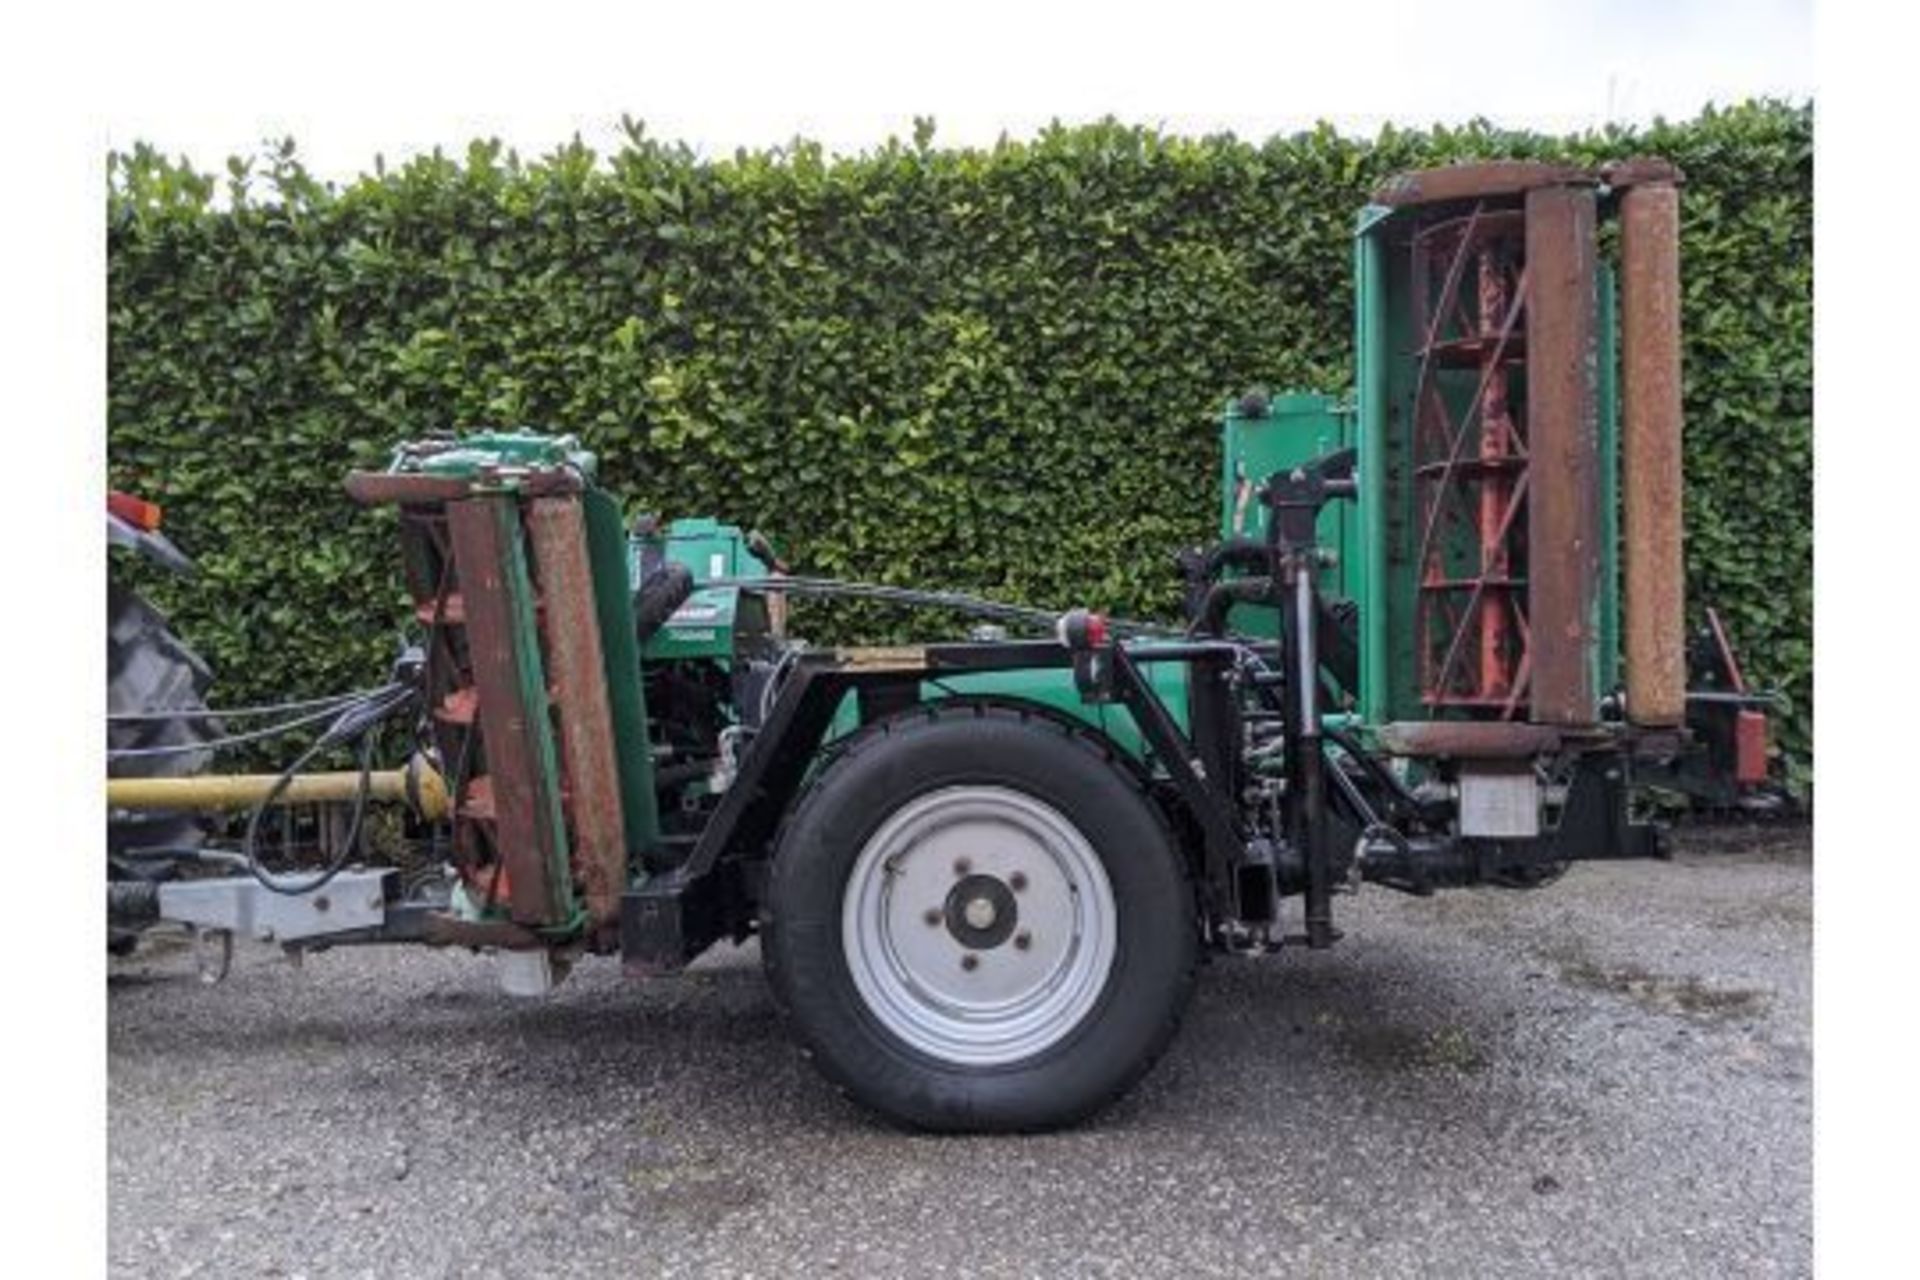 Ransomes TG3400 Tow Behind Gang Mower - Image 2 of 5